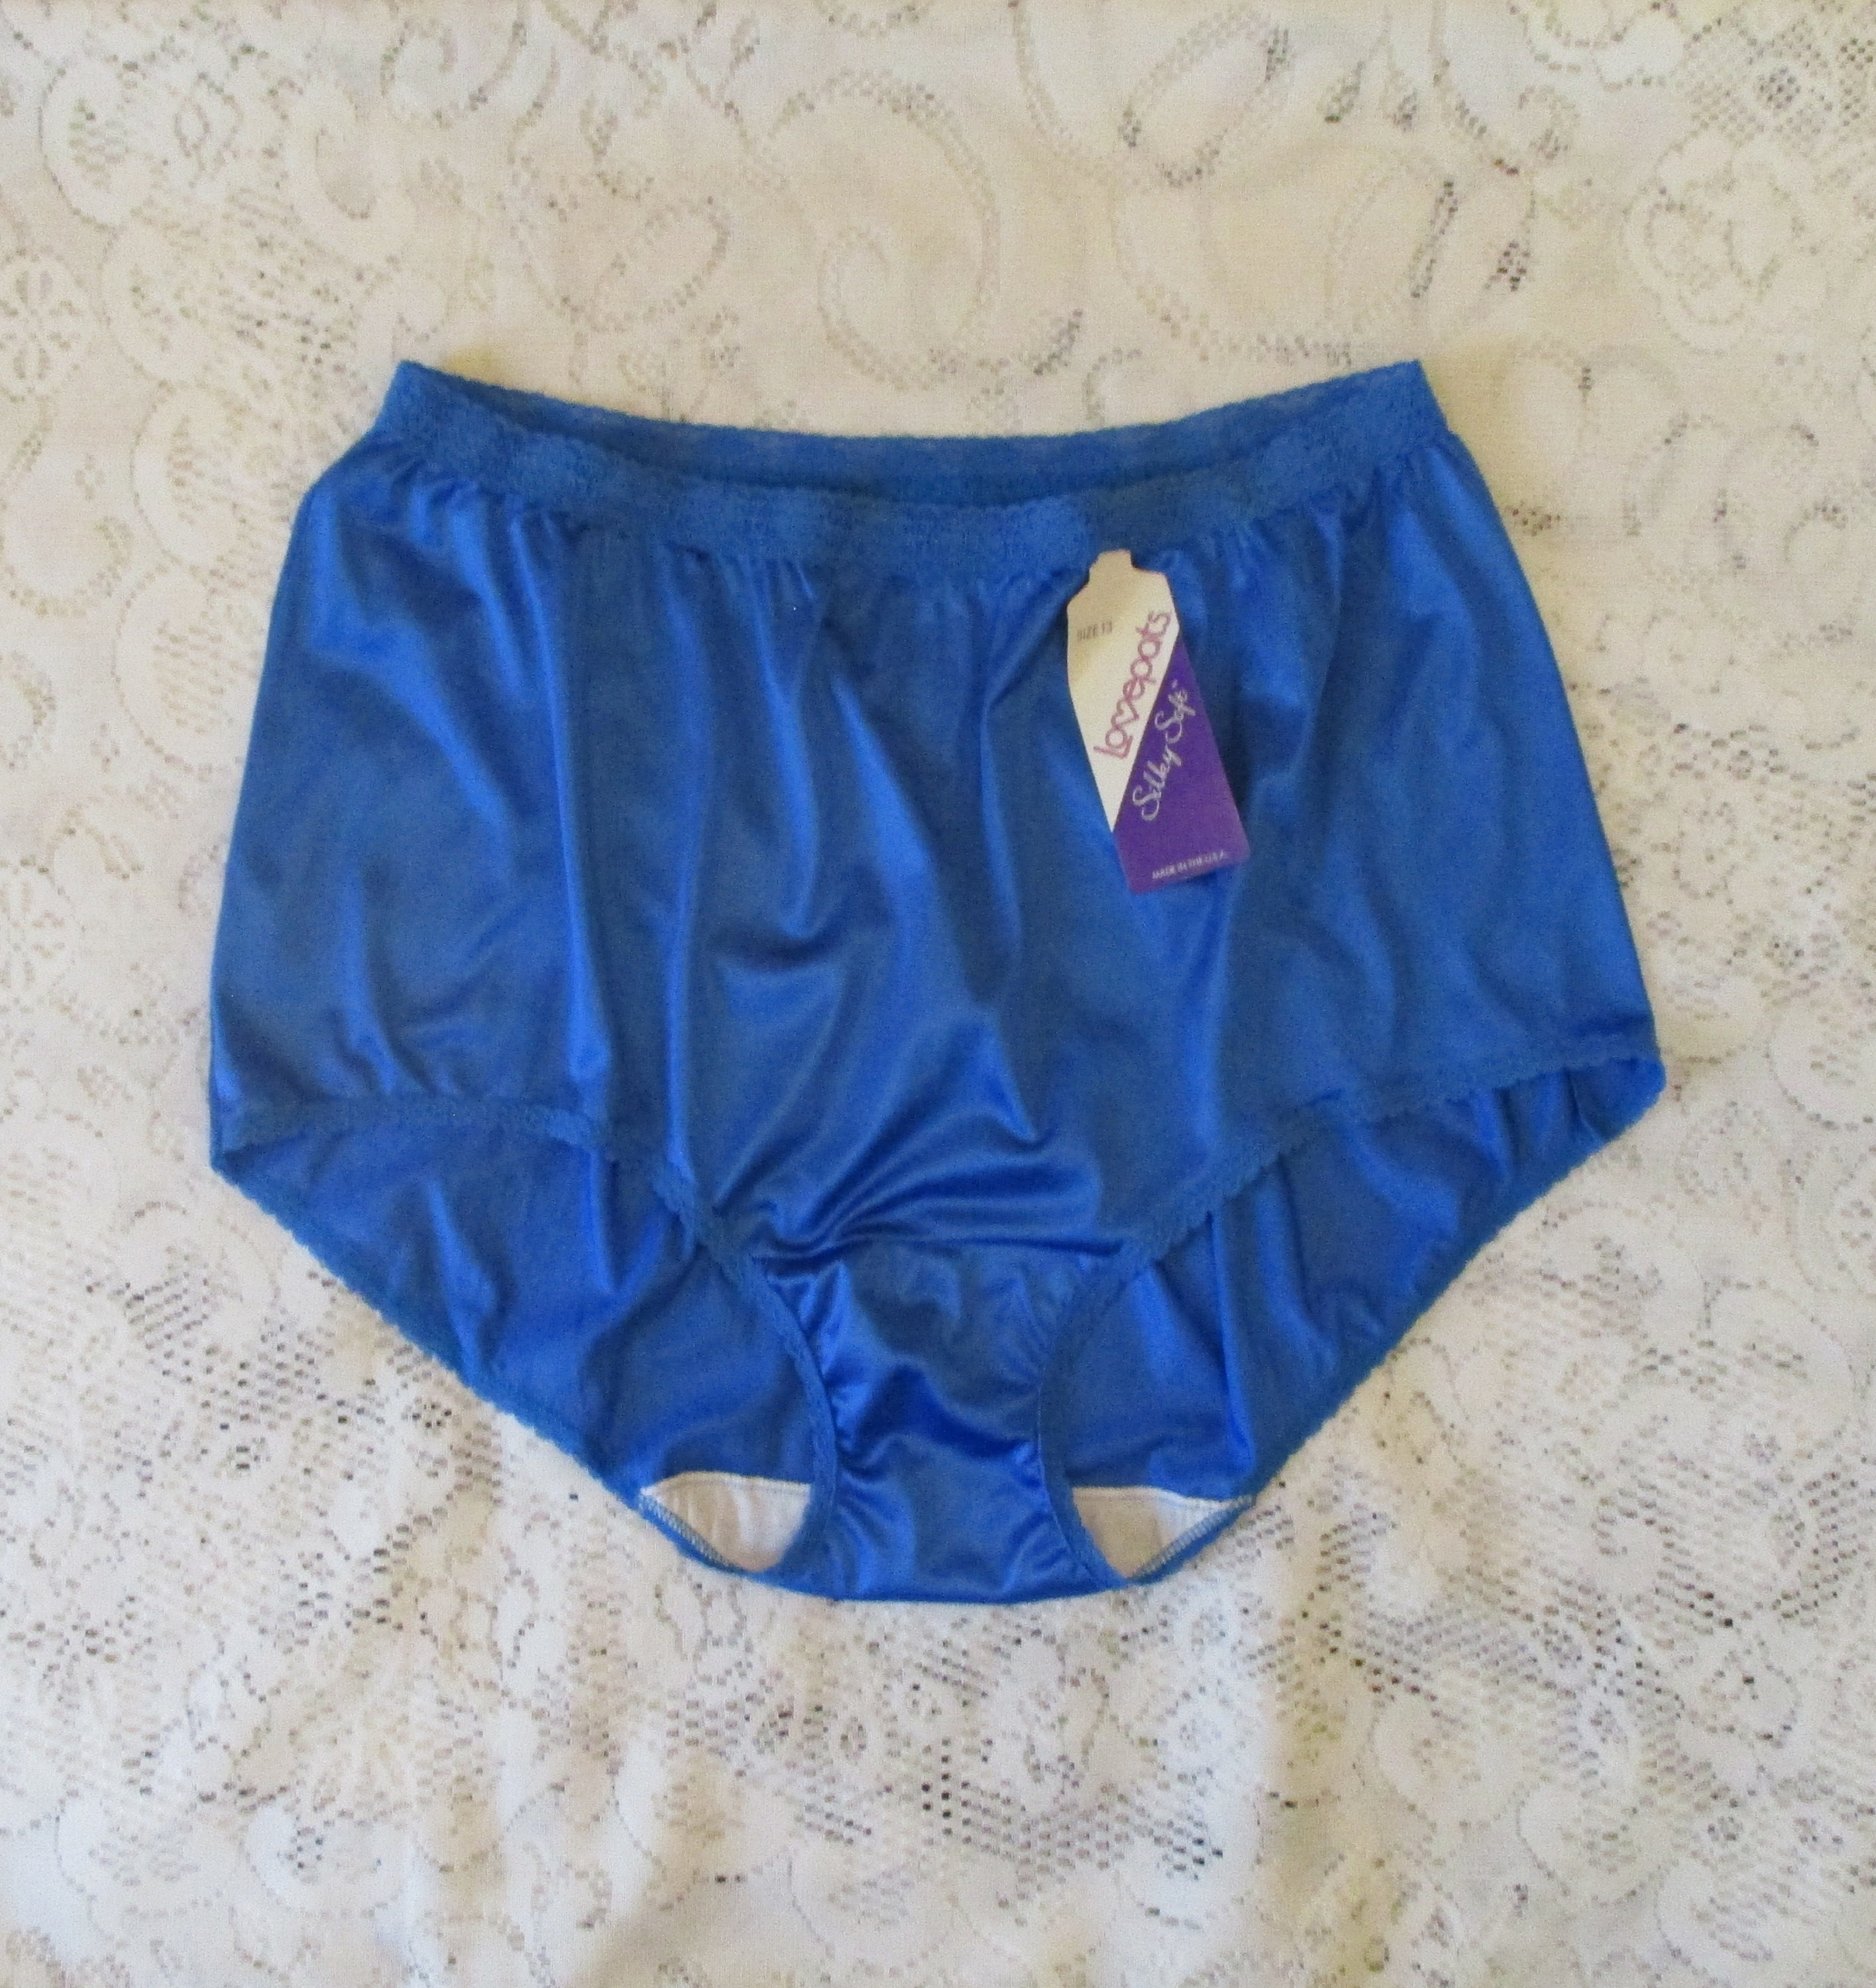 Vintage Granny Sissy Full Cut Nylon Panties by Lovepats Silky Soft, size 9